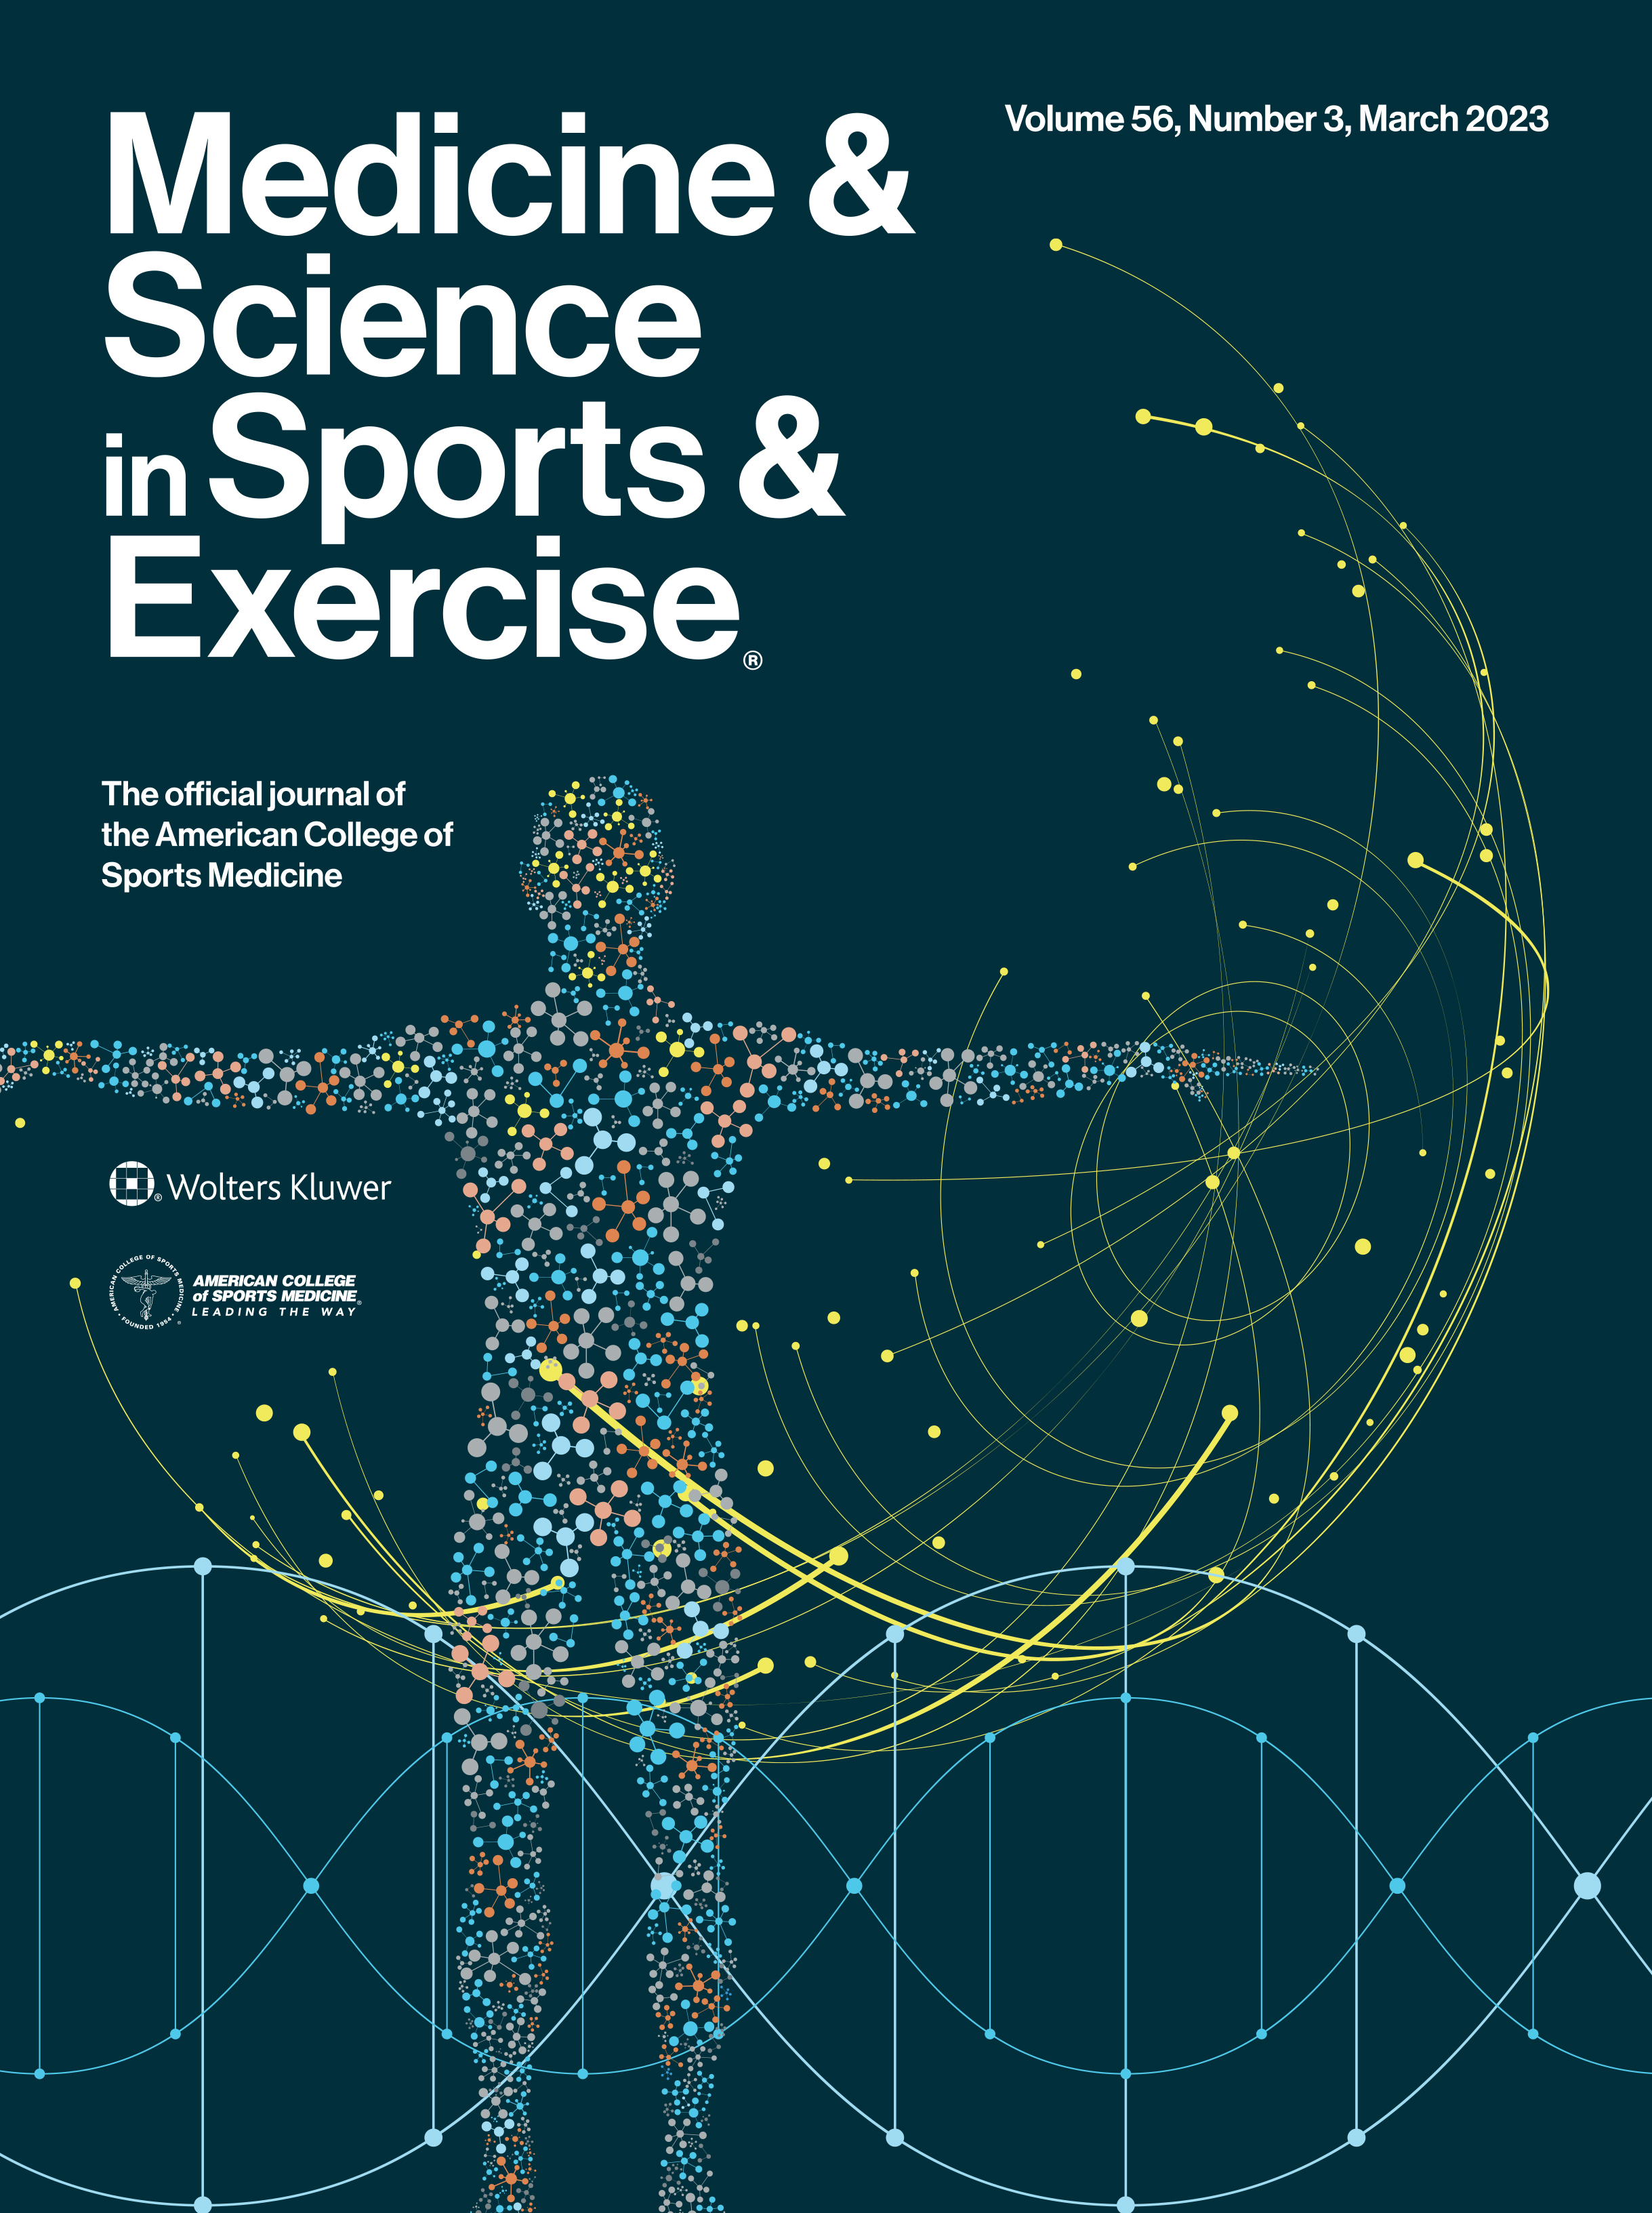 Medicine & Science in Sports & Exercise (MSSE)